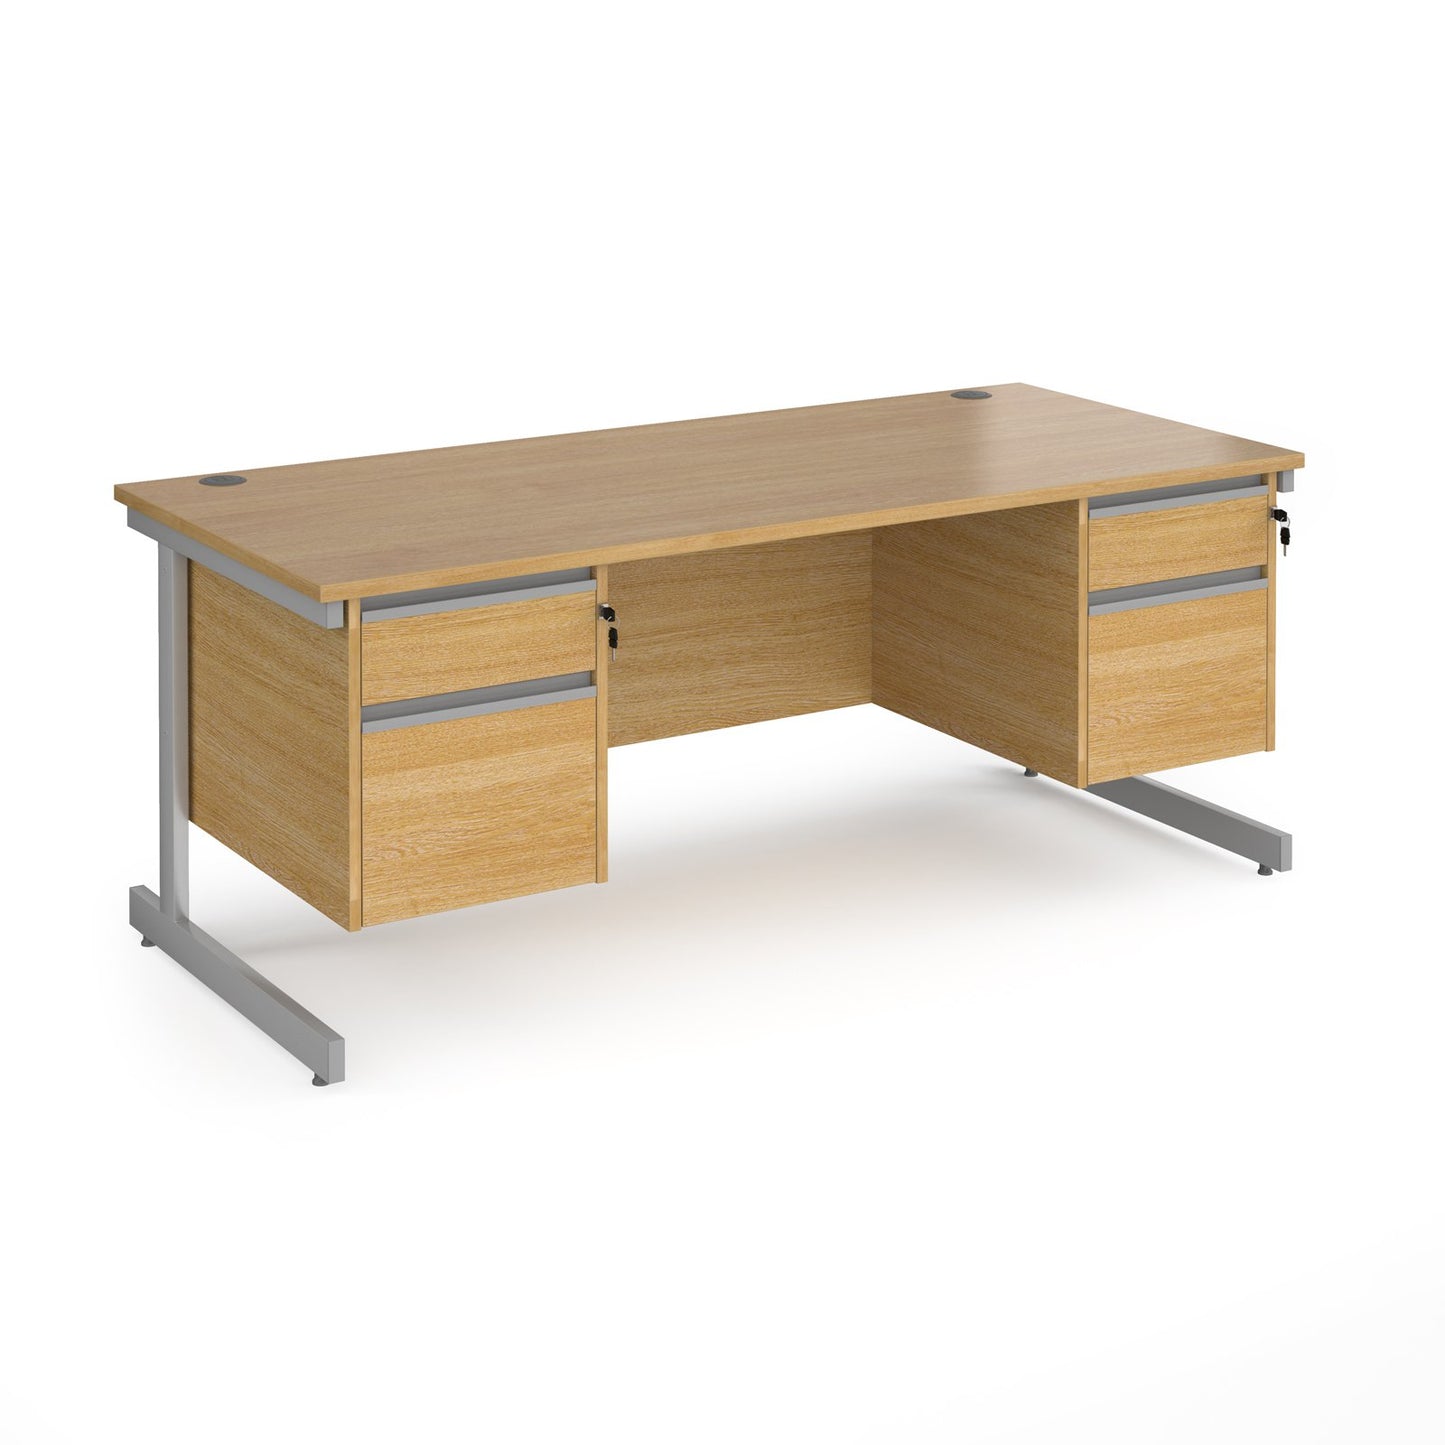 Contract 25 cantilever leg straight desk with 2 and 2 drawer peds